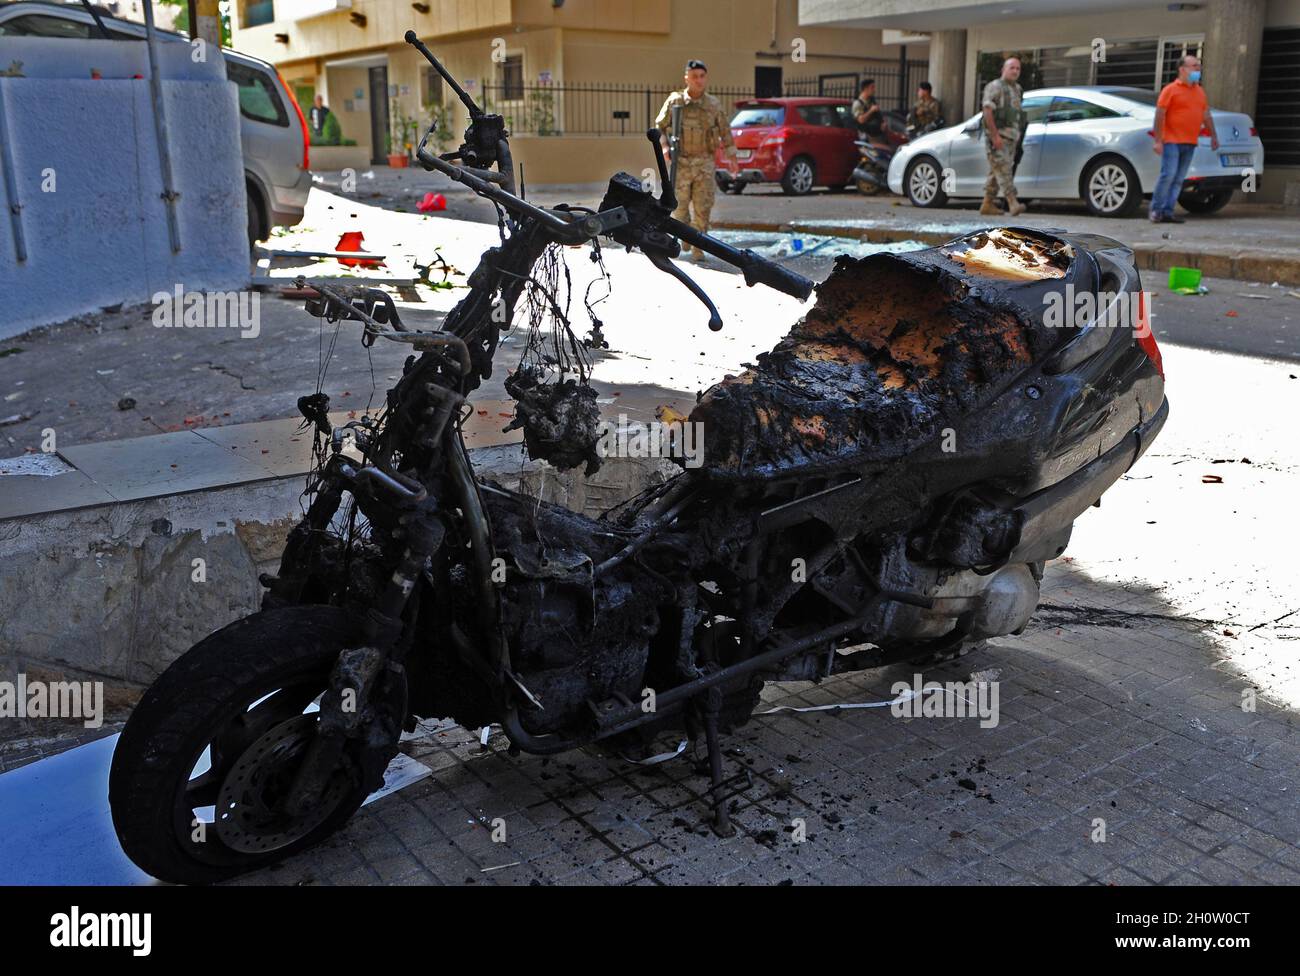 Beirut, Lebanon. 14th Oct, 2021. A damaged motorcycle is pictured as soldiers are deployed after gunfire erupted in Beirut, Lebanon, on Thursday on October 14, 2021. Armed clashes broke out in Beirut Thursday during the protest against the lead judge investigating last year's massive blast in the city's port, as tensions over the domestic probe boiled over. photo by Jamal Eddine/ Credit: UPI/Alamy Live News Stock Photo